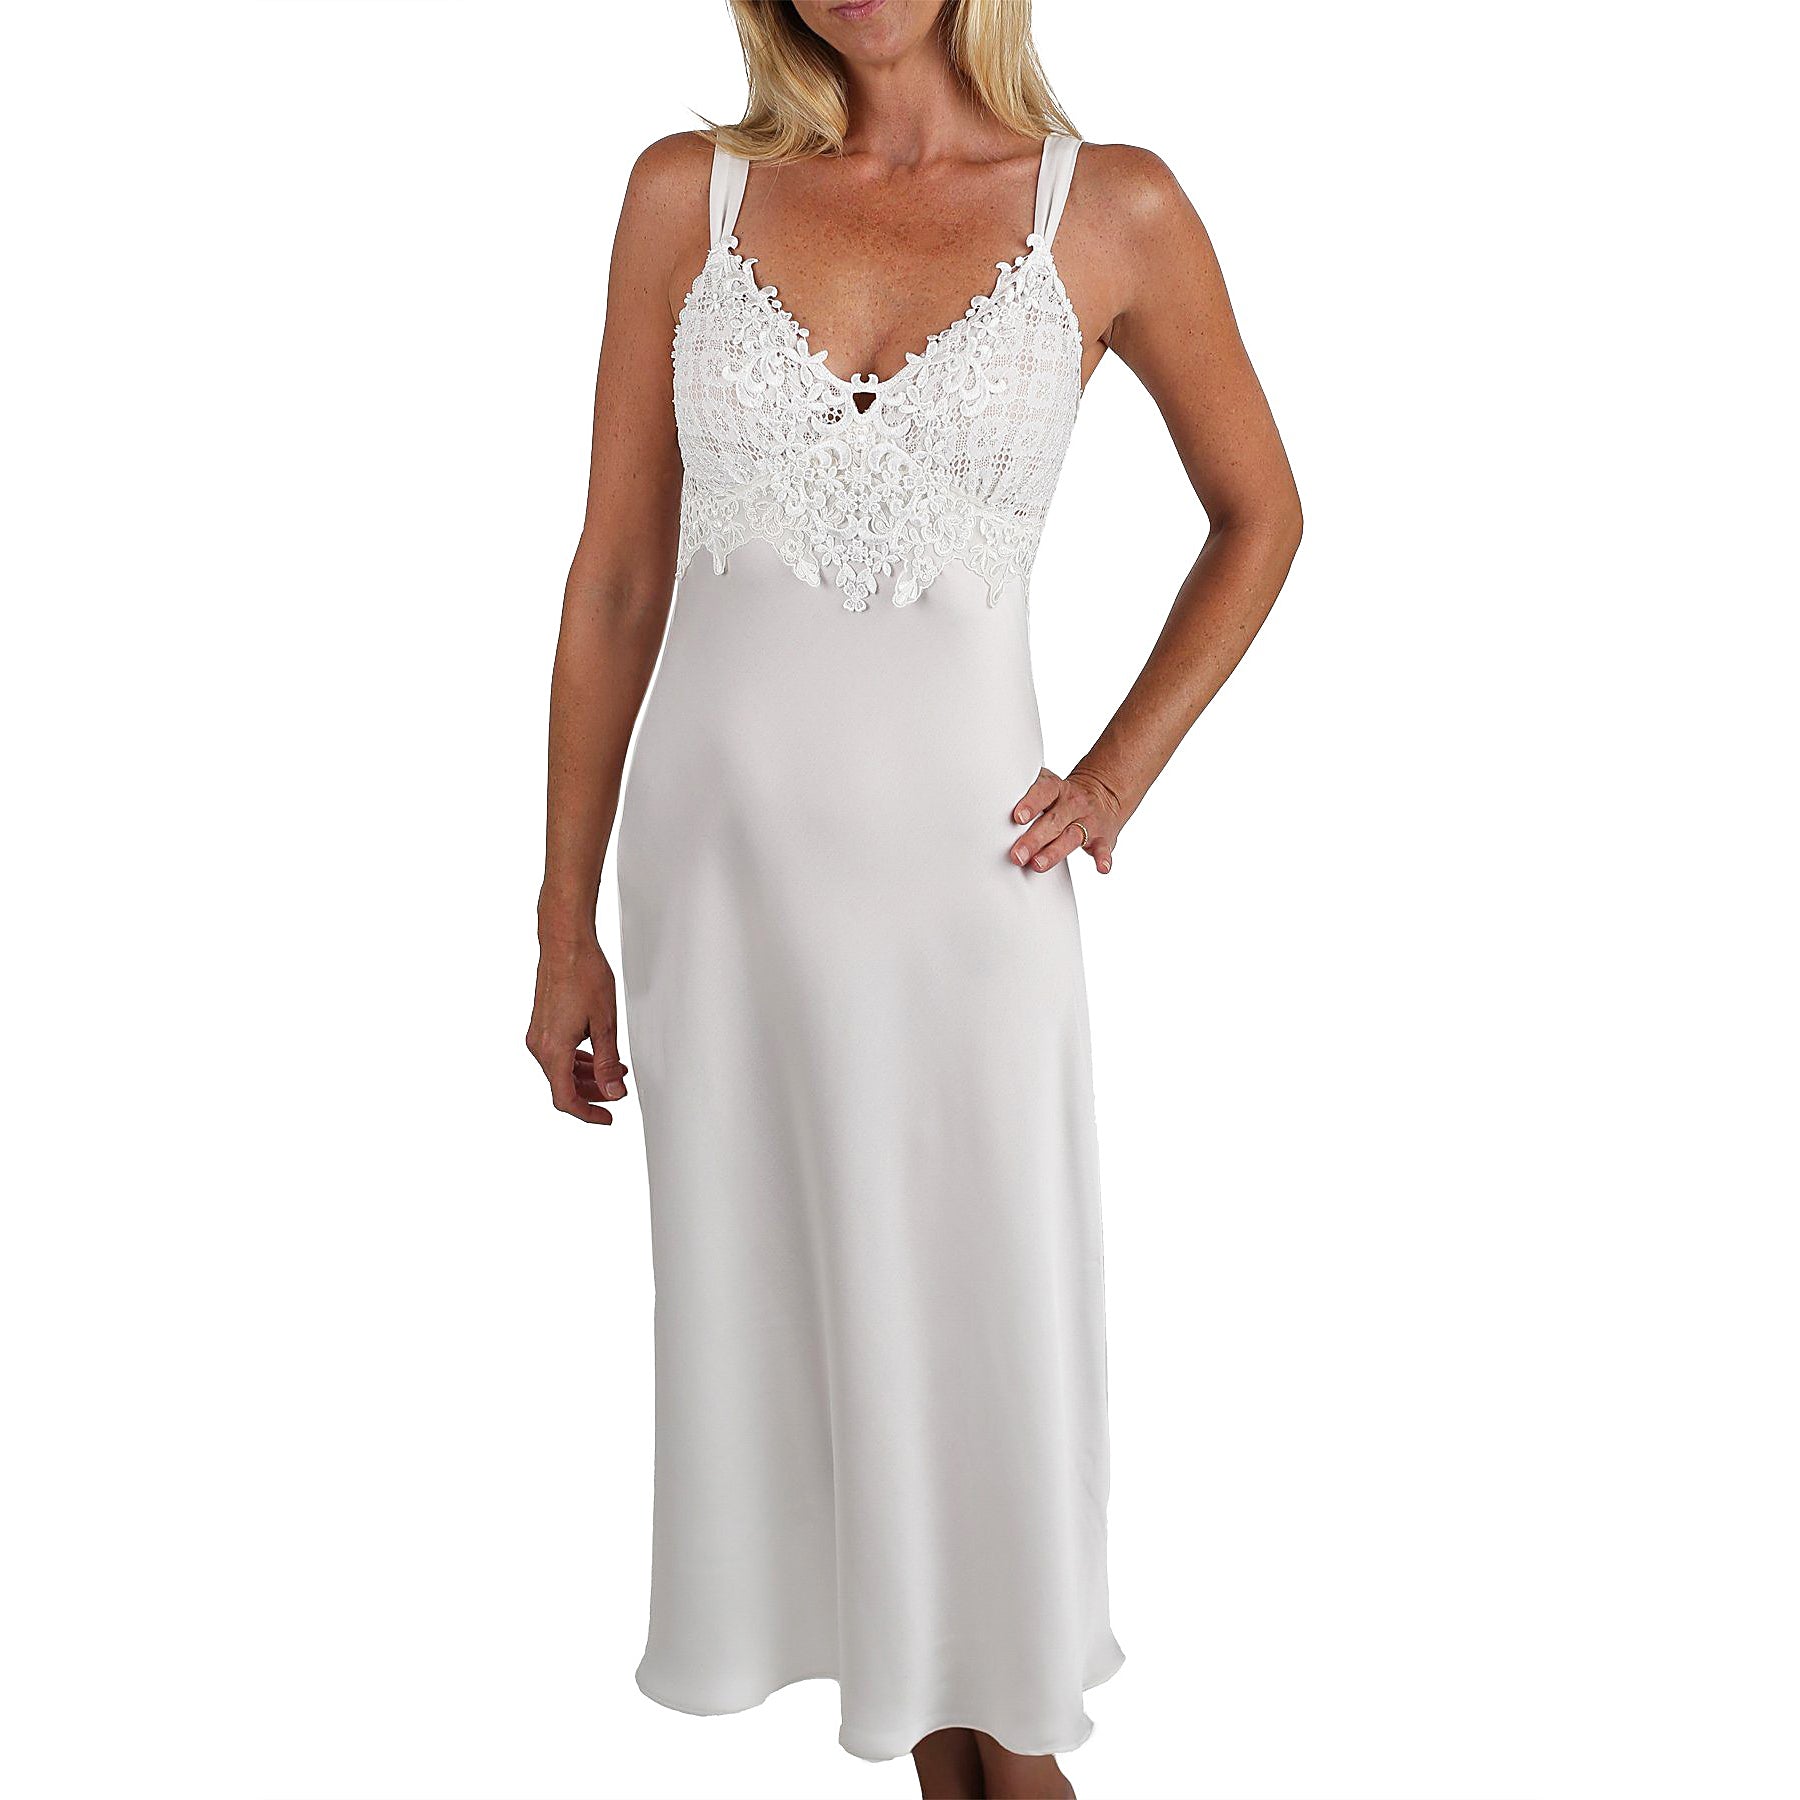 Enchanting Nightgown - Pearl White Mystique Intimates